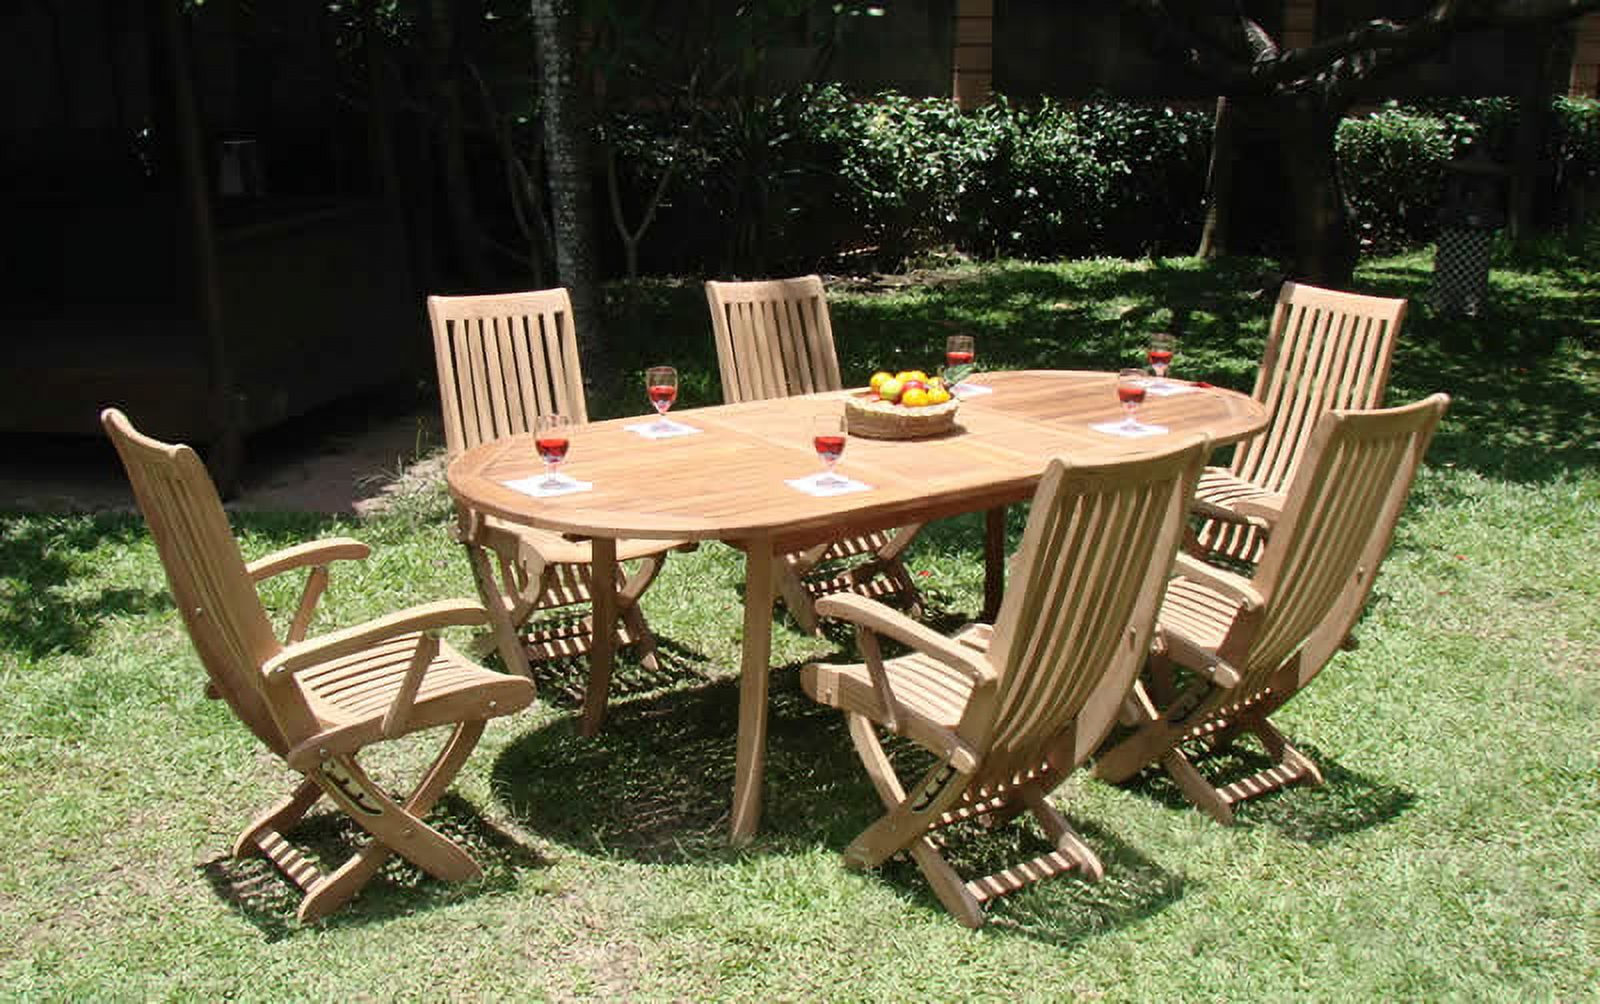 Teak Dining Set:6 Seater 7 Pc - 94" Oval Table And 6 Multi Position Folding Reclining Warwick Arm Chairs Outdoor Patio Grade-A Teak Wood WholesaleTeak #WMDSWR4 - image 1 of 4